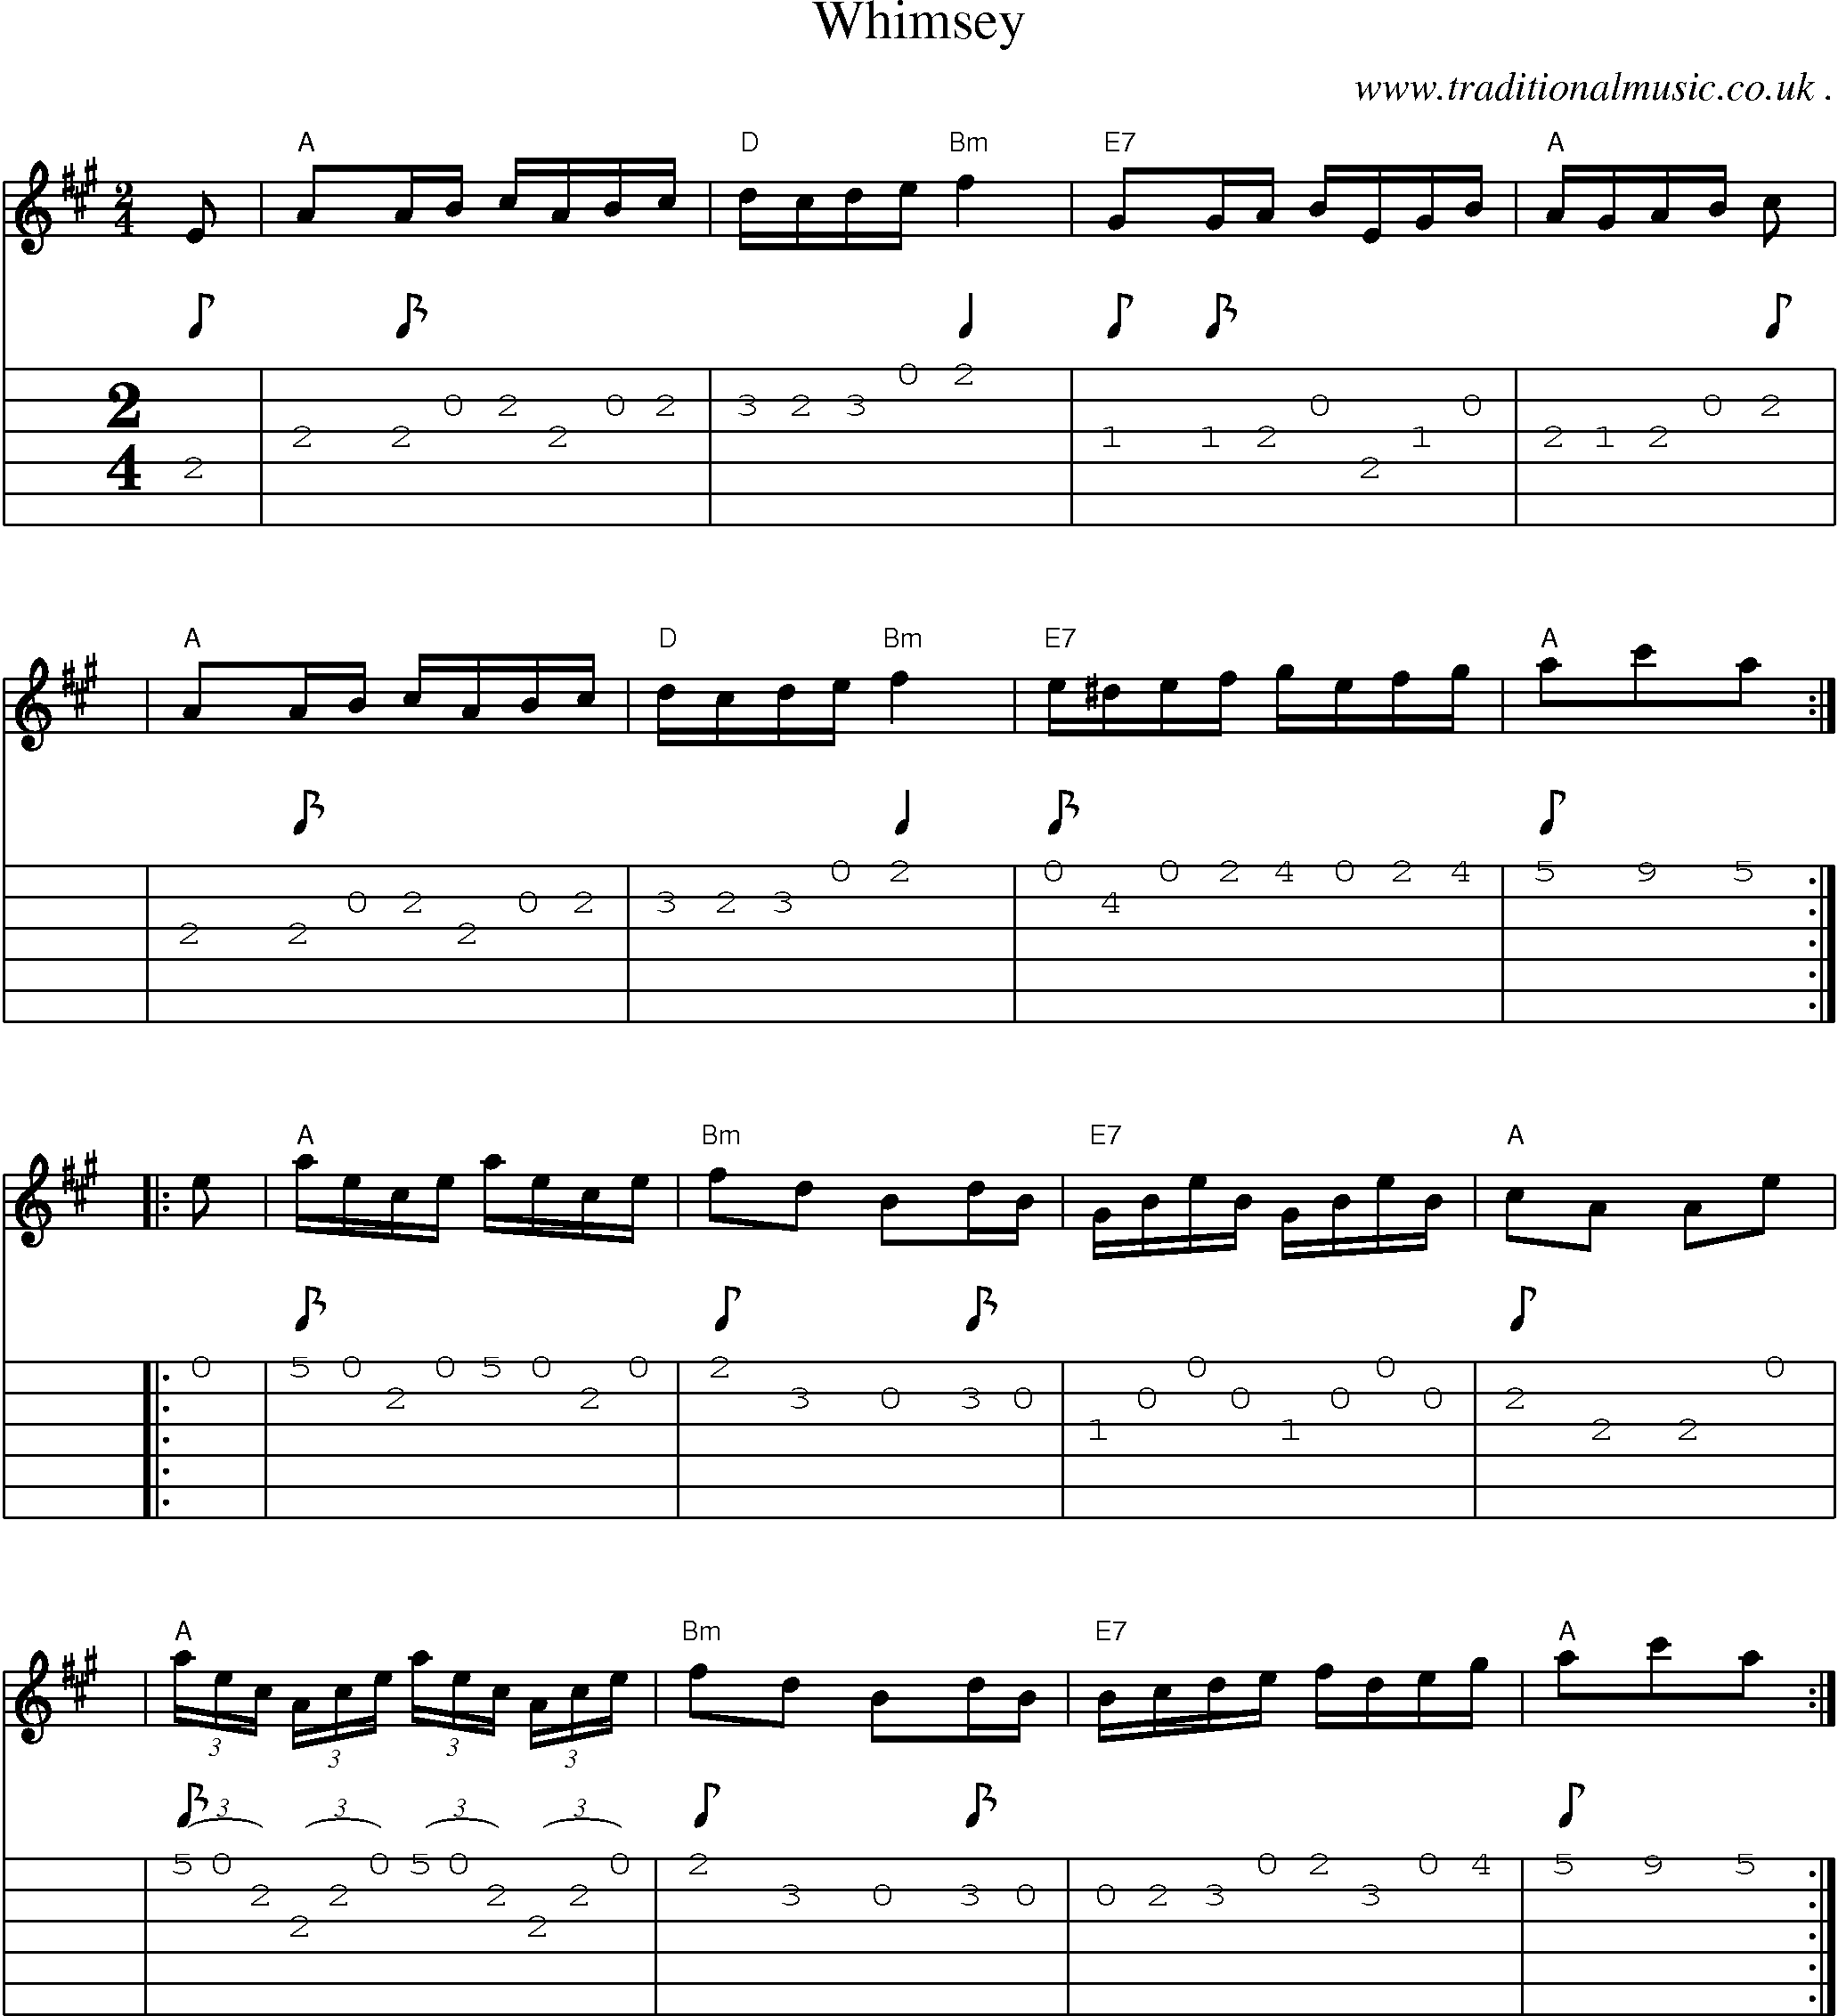 Sheet-music  score, Chords and Guitar Tabs for Whimsey